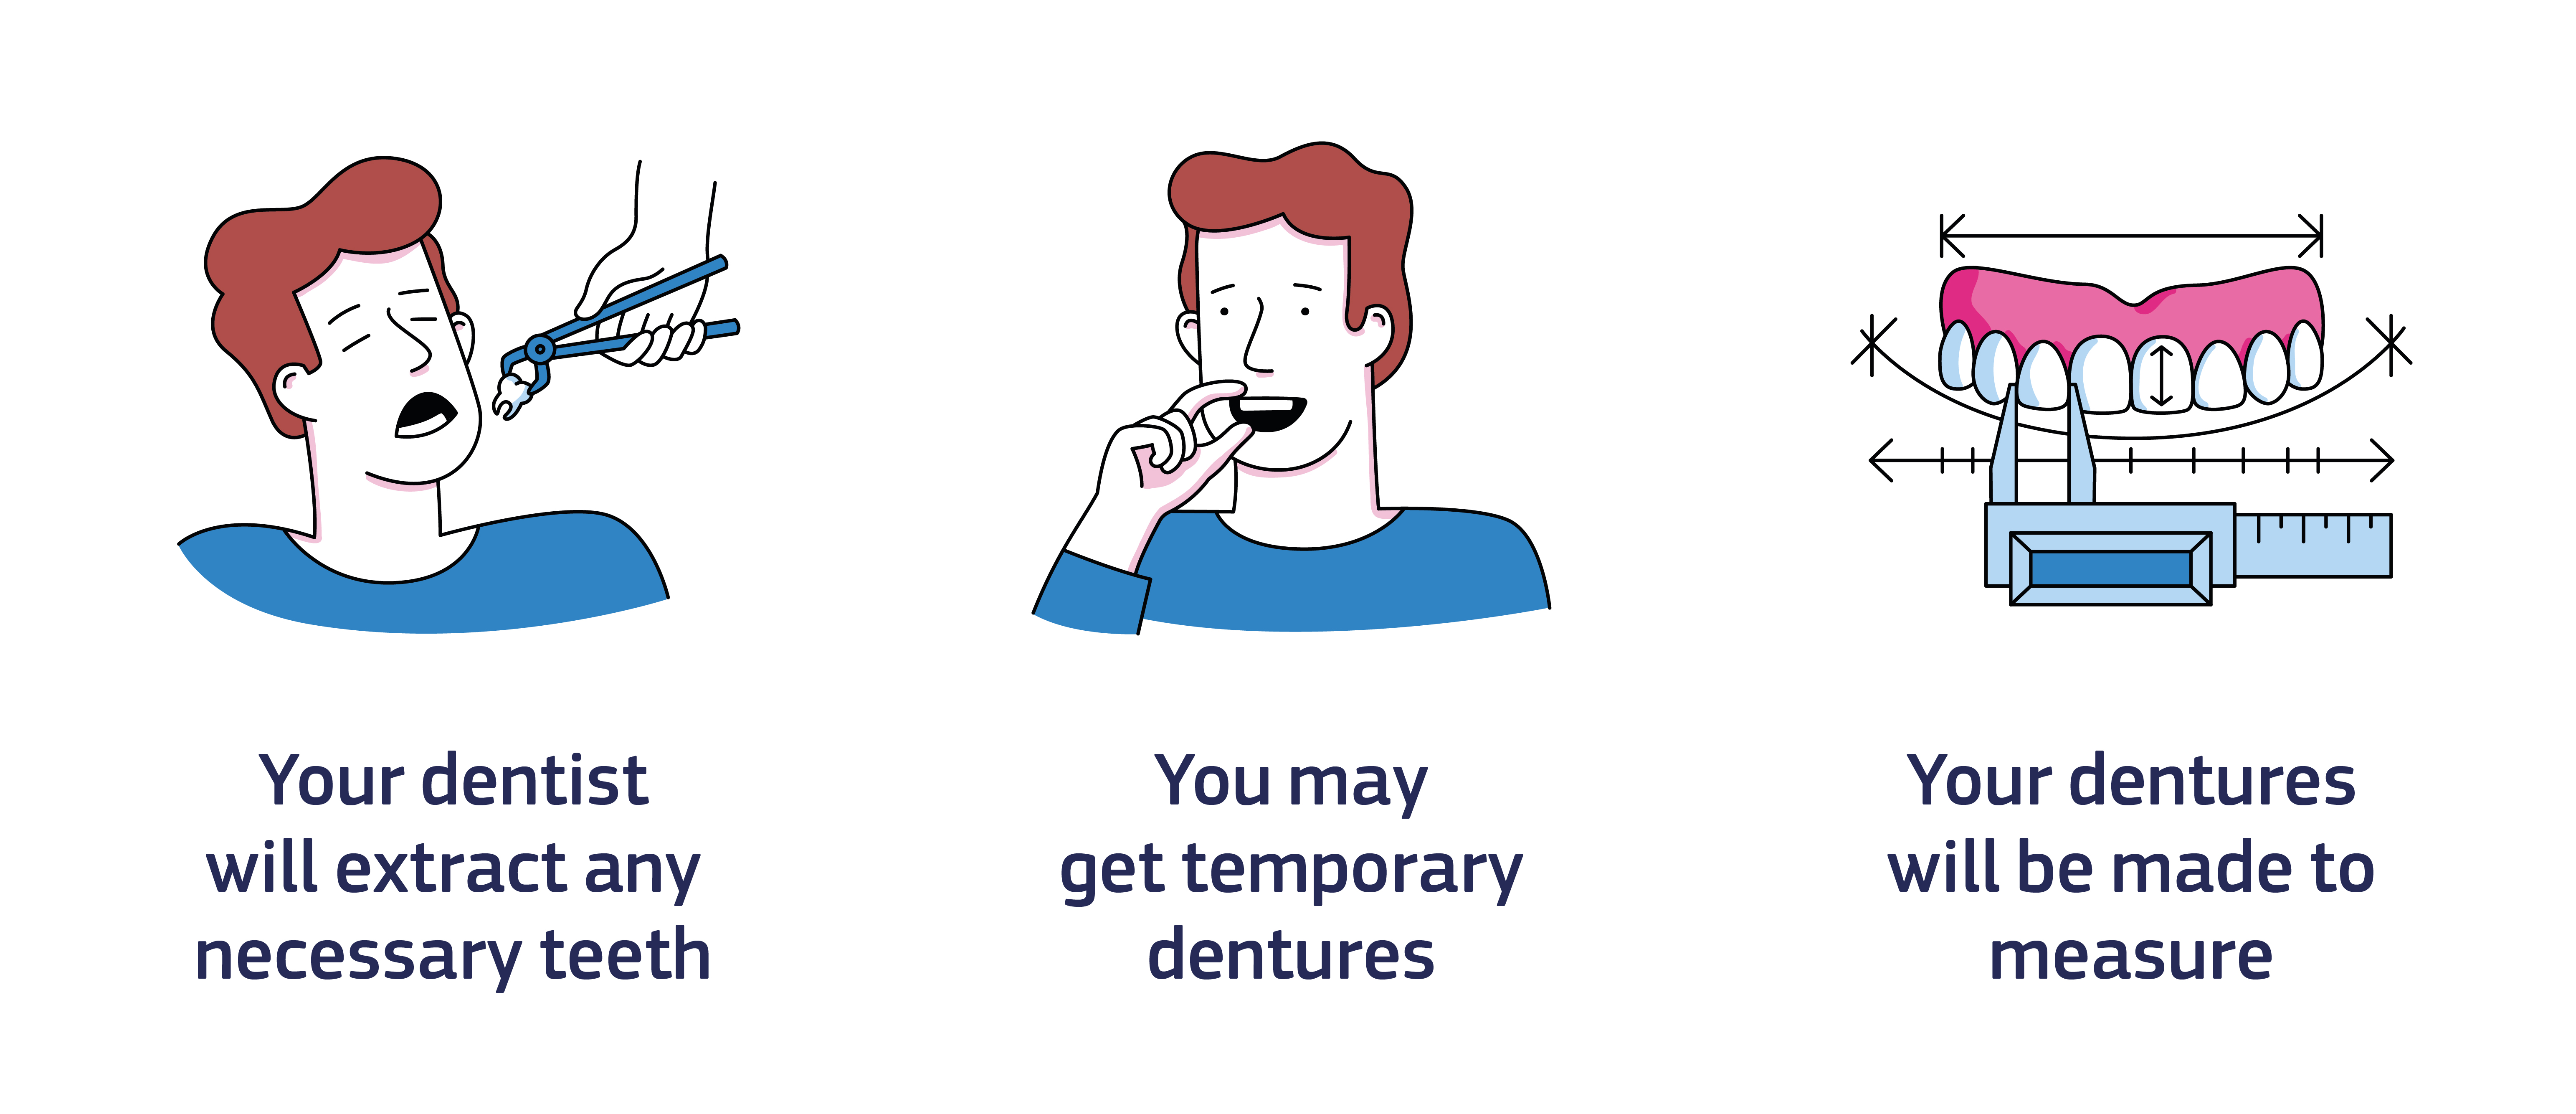 An infographic showing what to expect at the dentist: Step 1. Your dentist will extract any necessary teeth. Step 2. You may get temporary dentures. Step 3. Your dentures will be made to measure.